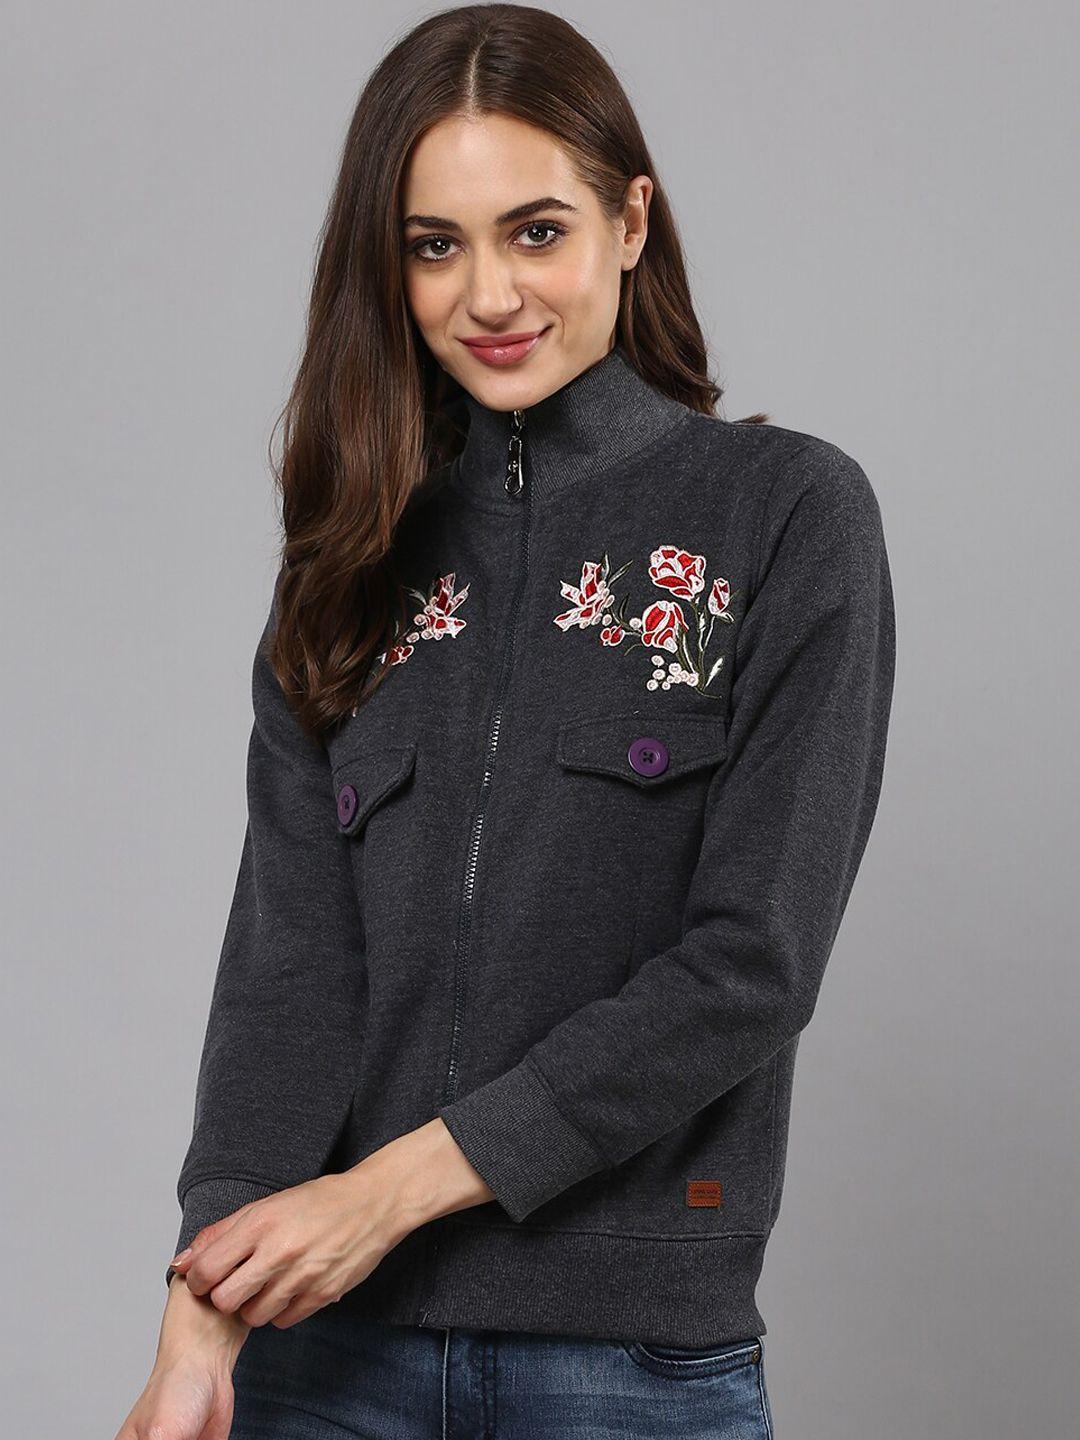 campus sutra women charcoal grey & red embroidered sweatshirt